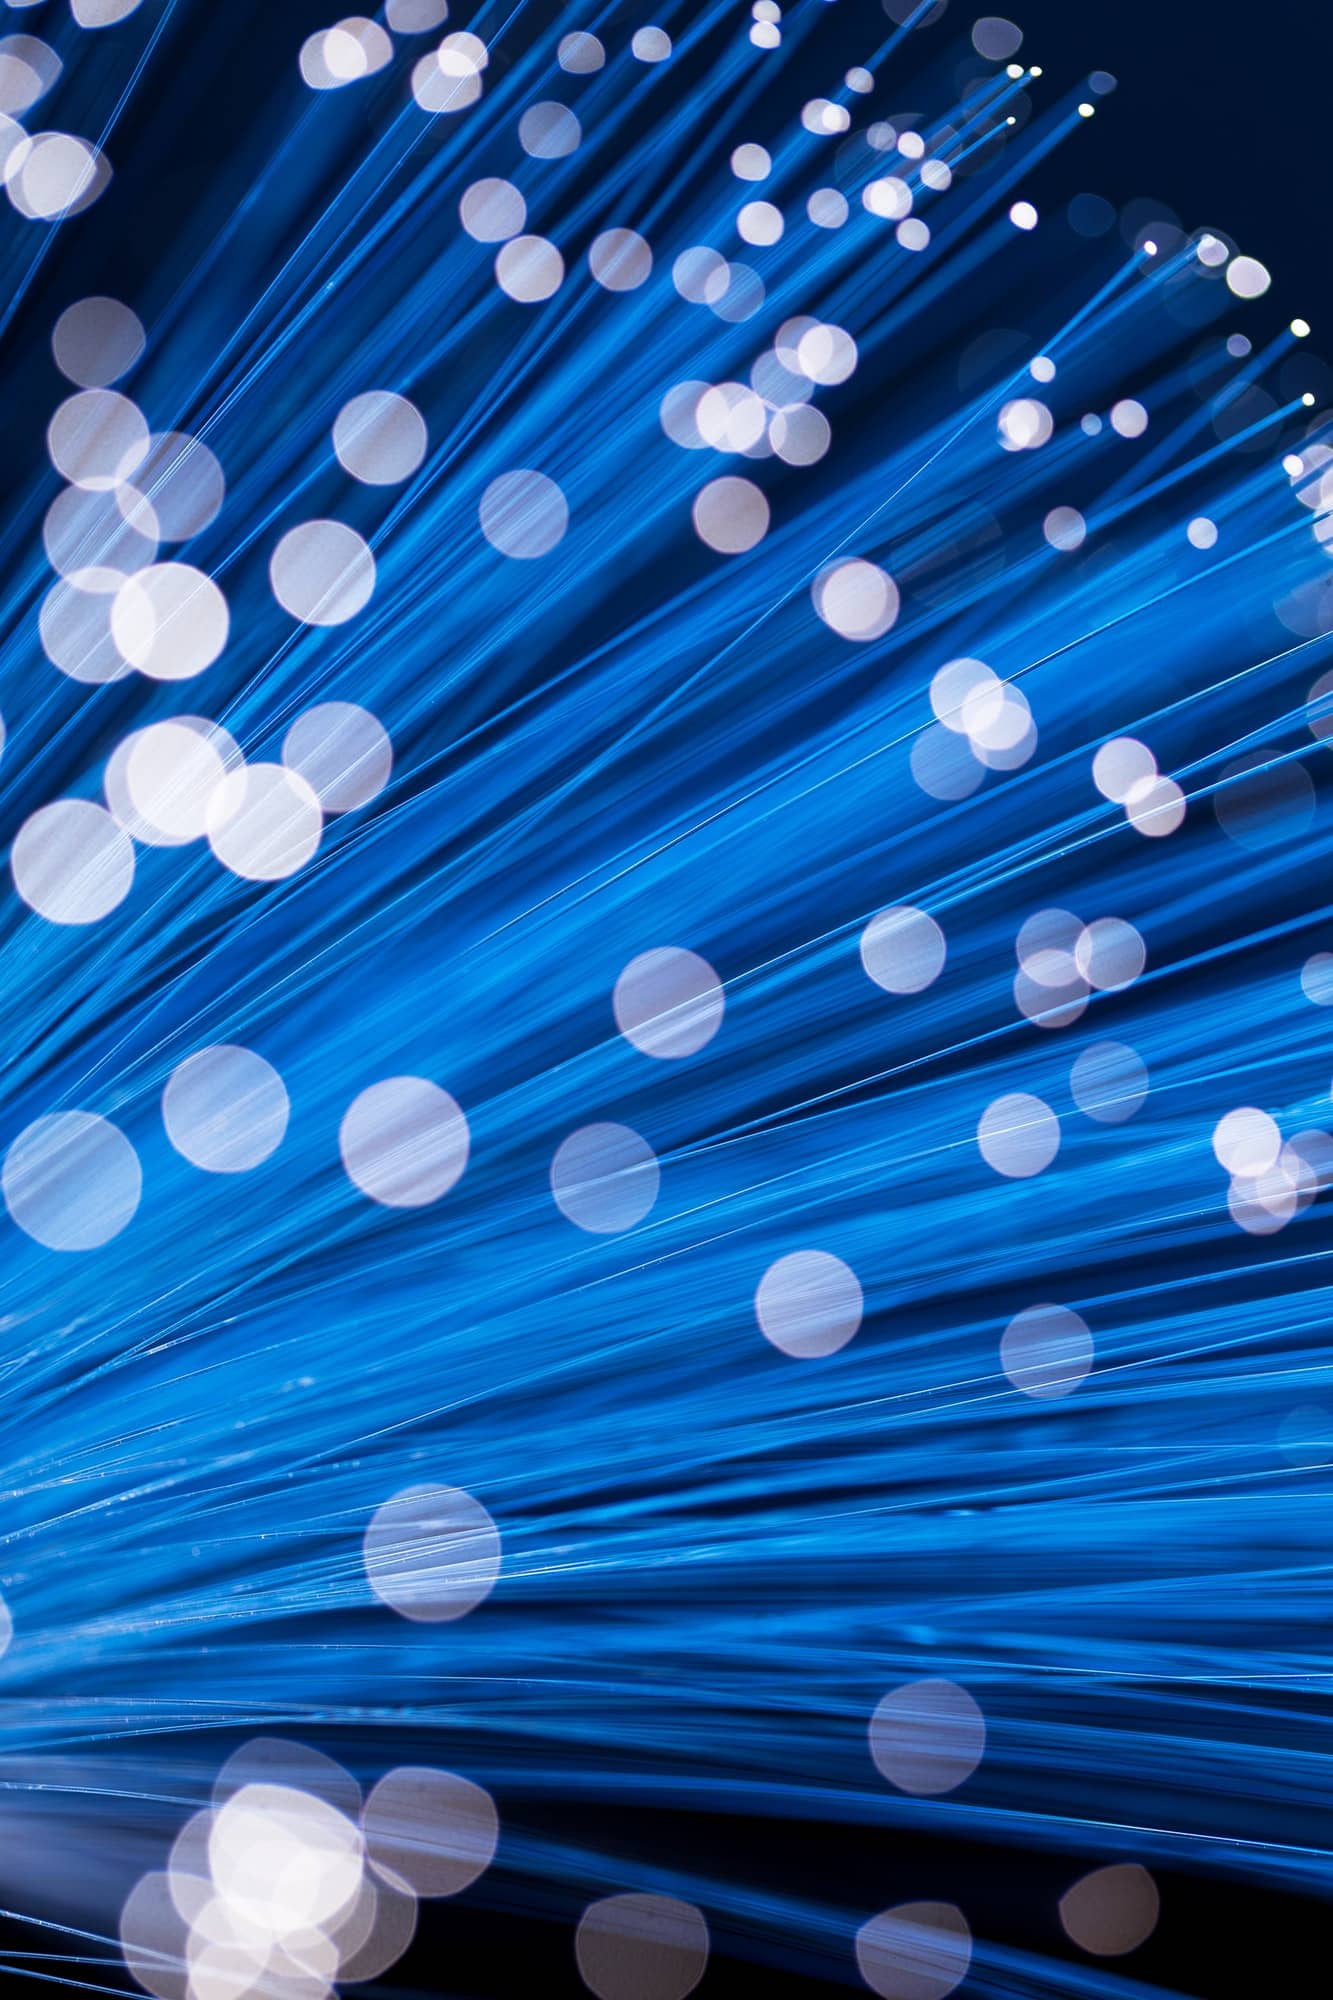 Image of a bunch of optical fibers on Softlinx' website